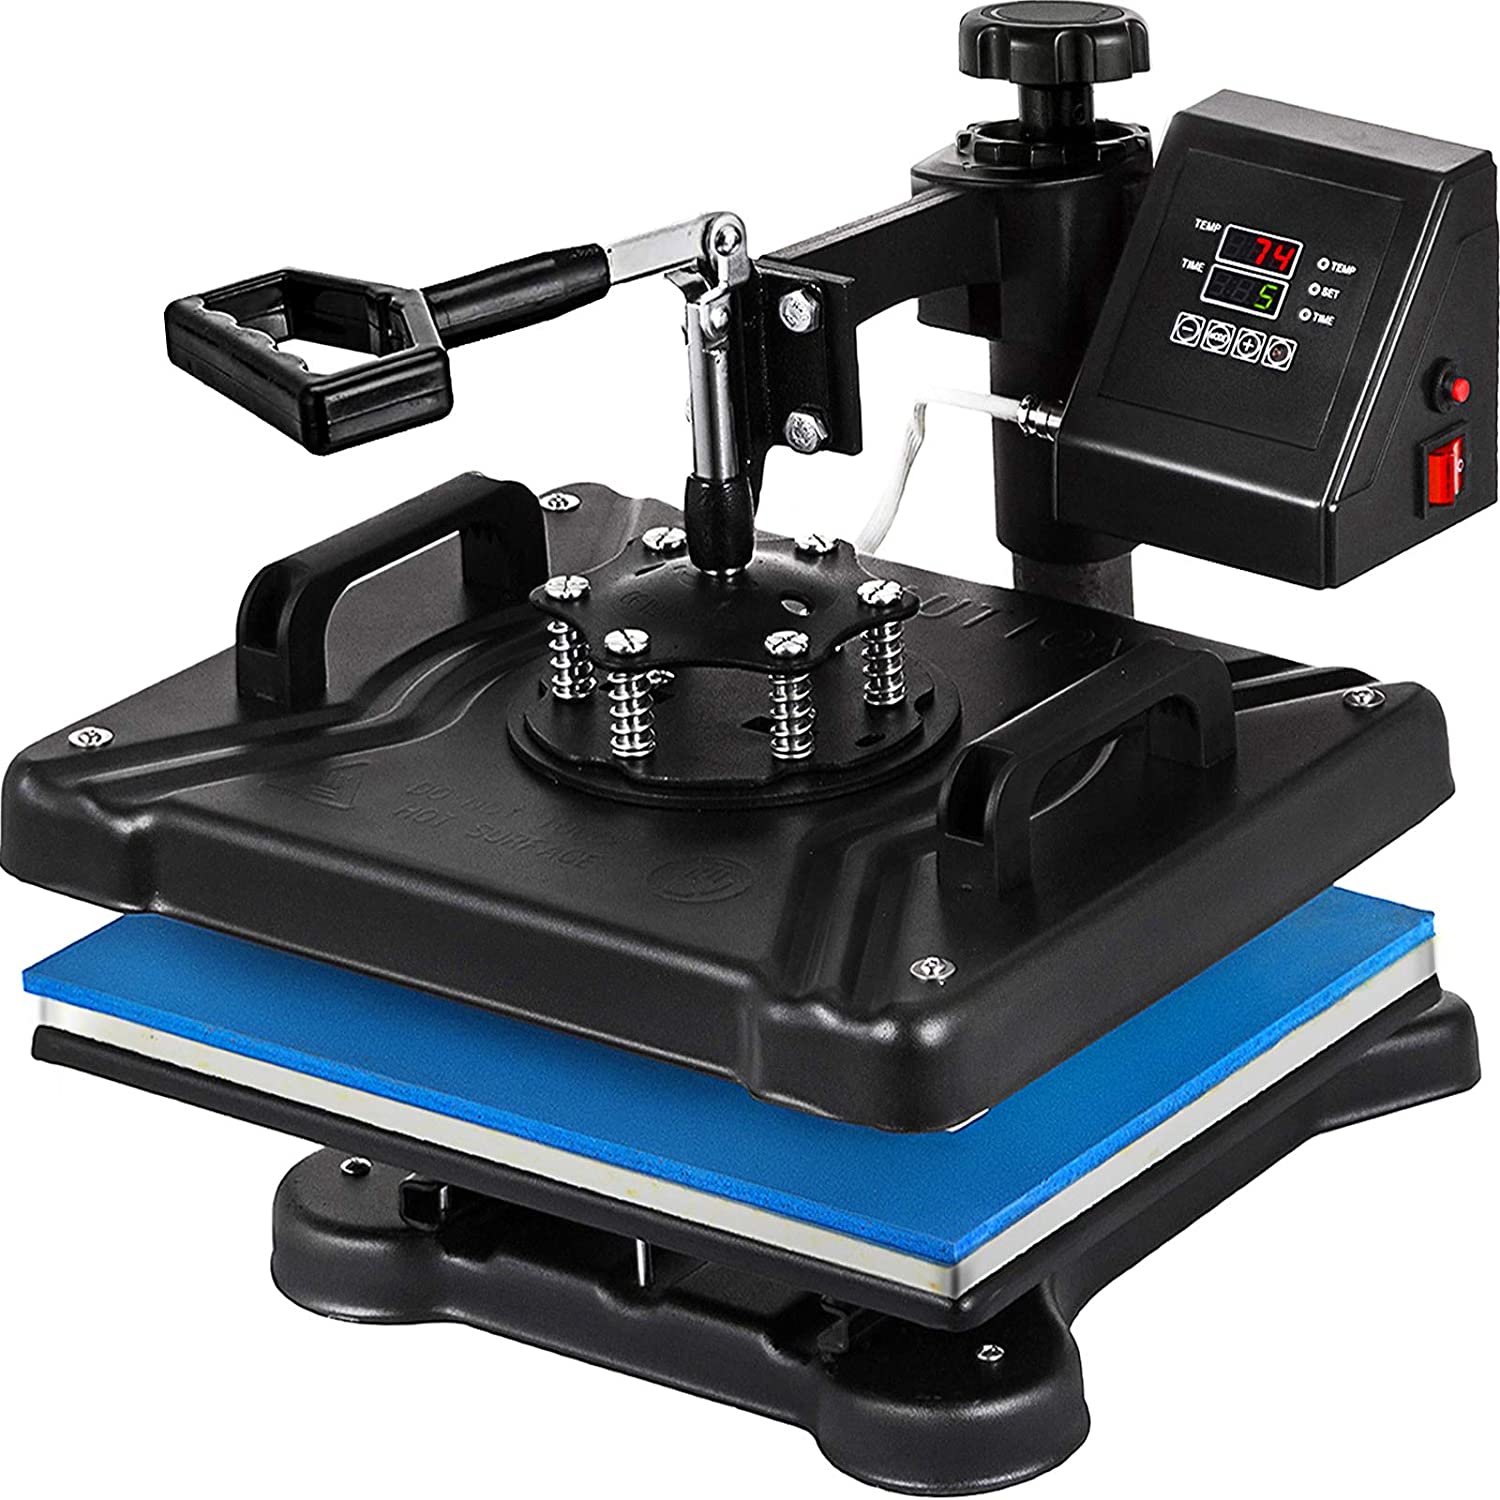 How to use a Heat press